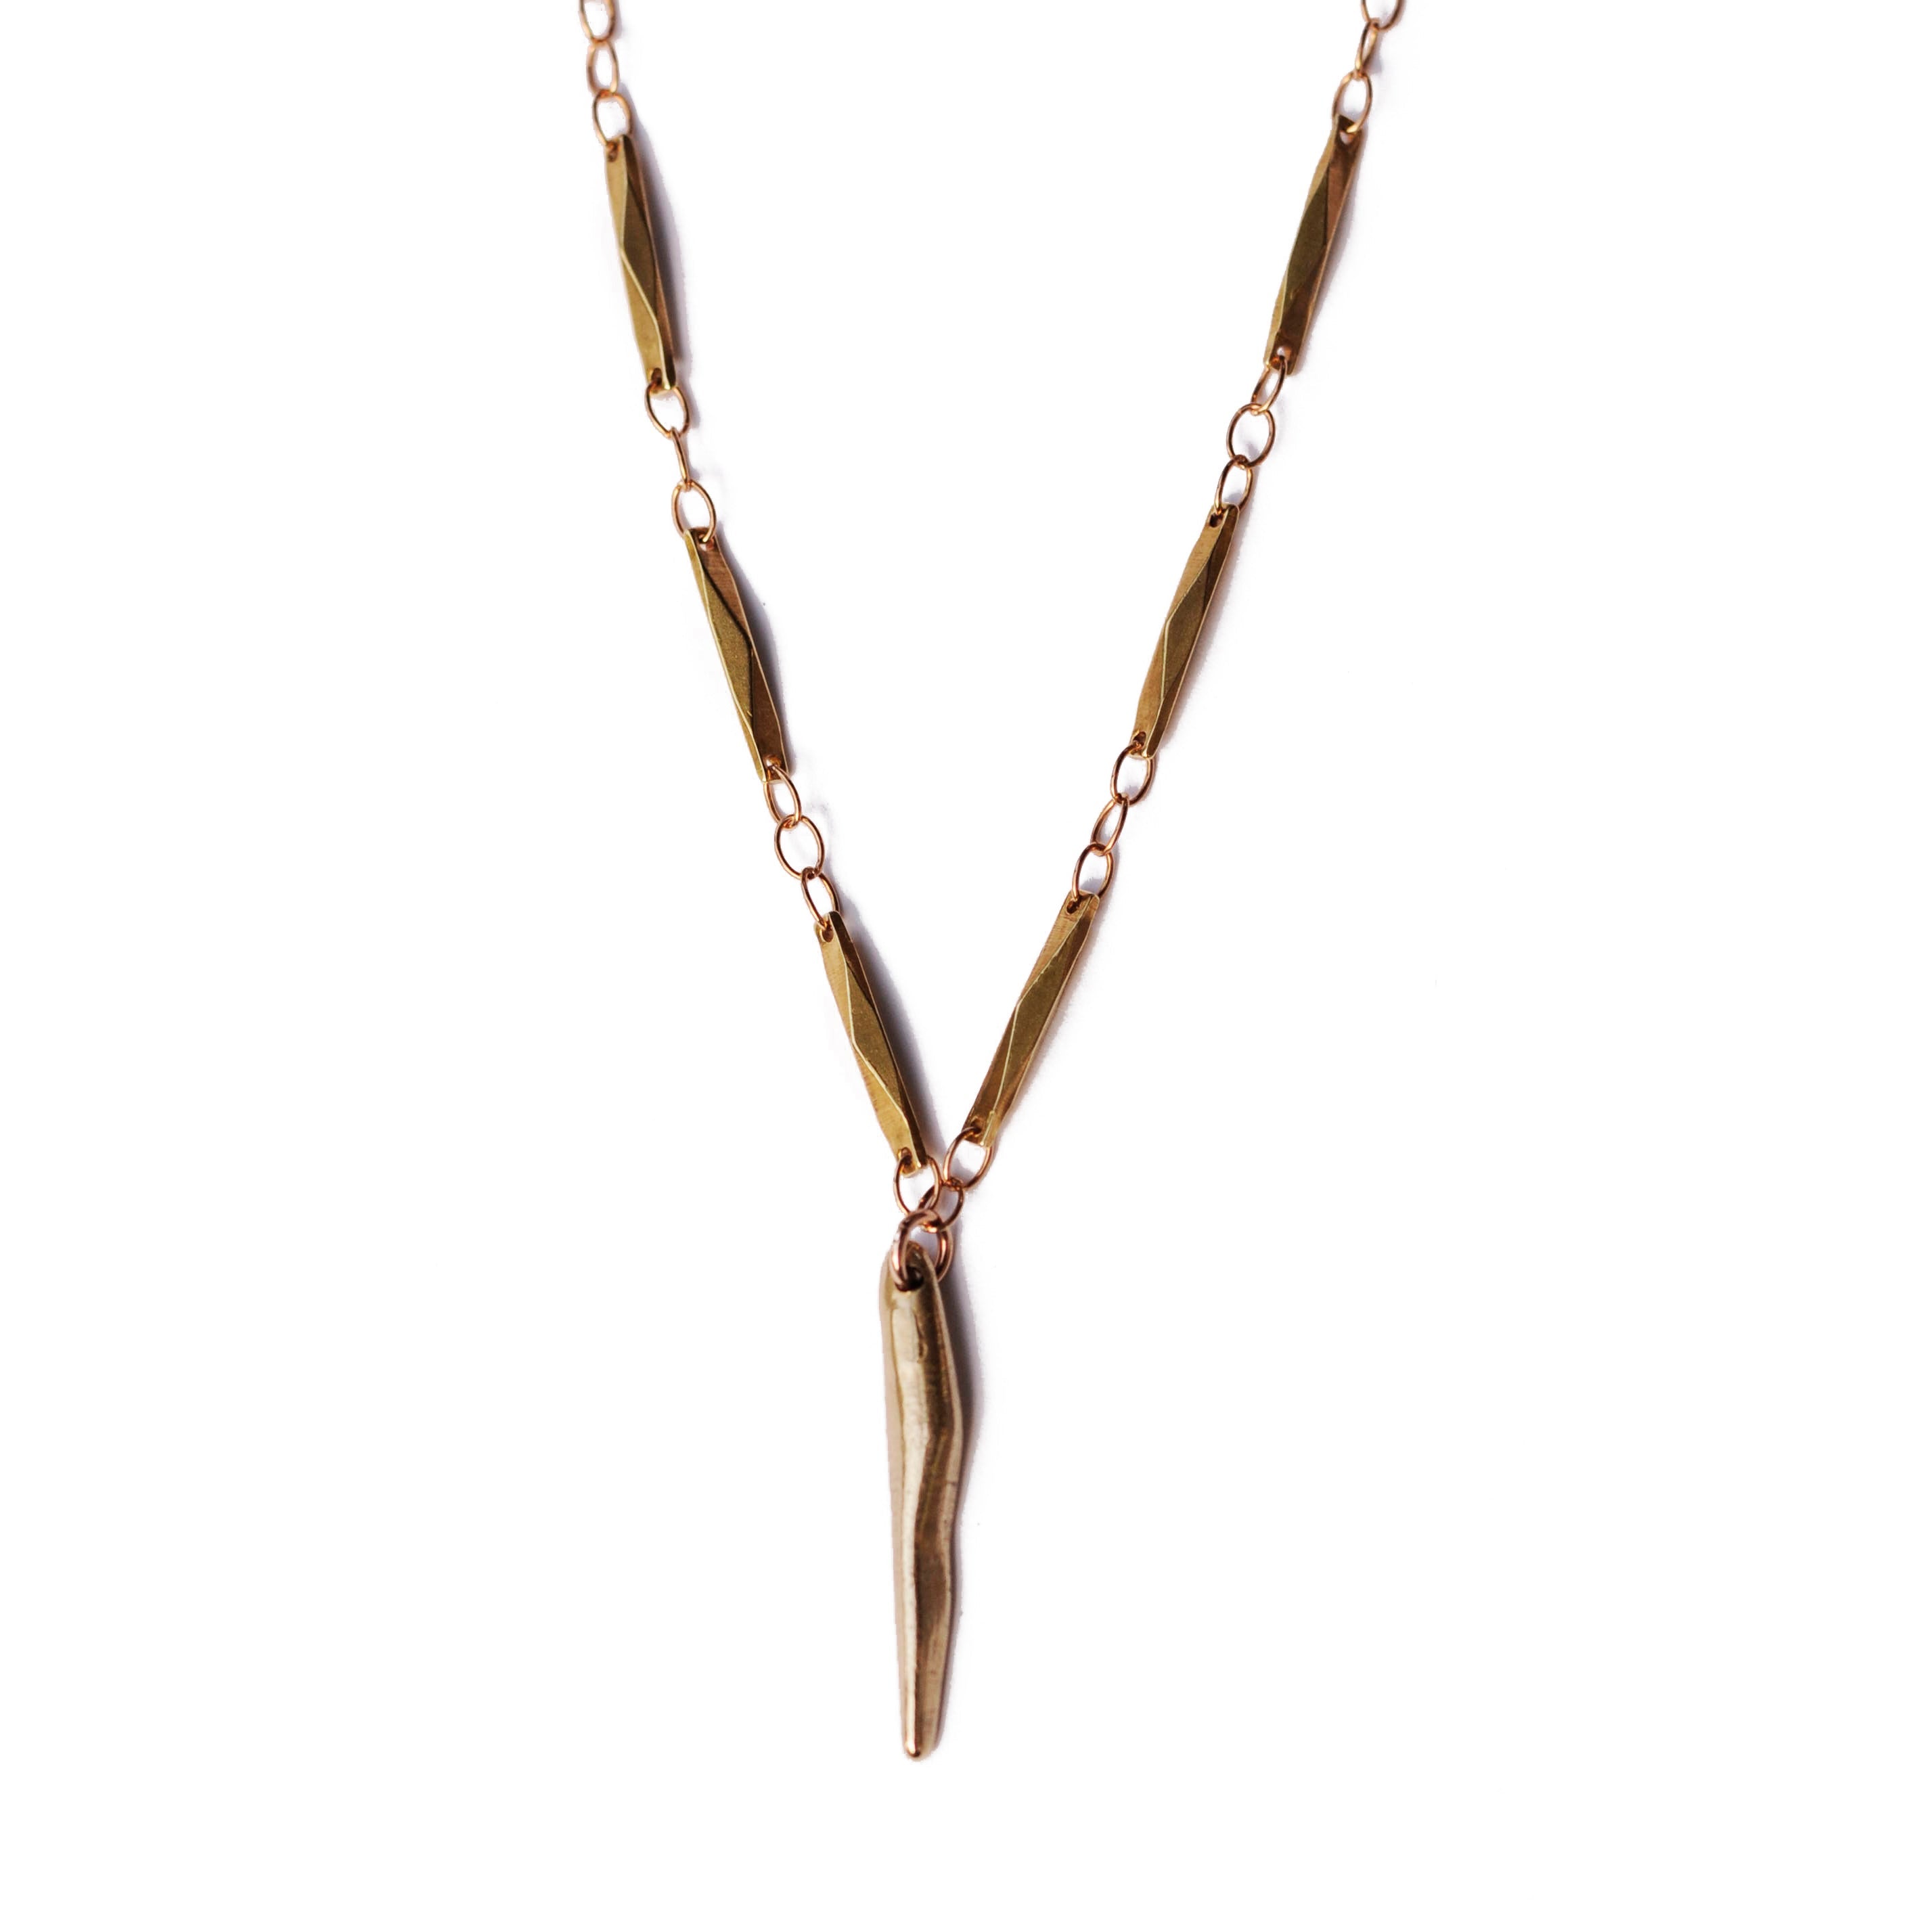 SALE - WATER SPEAR necklace